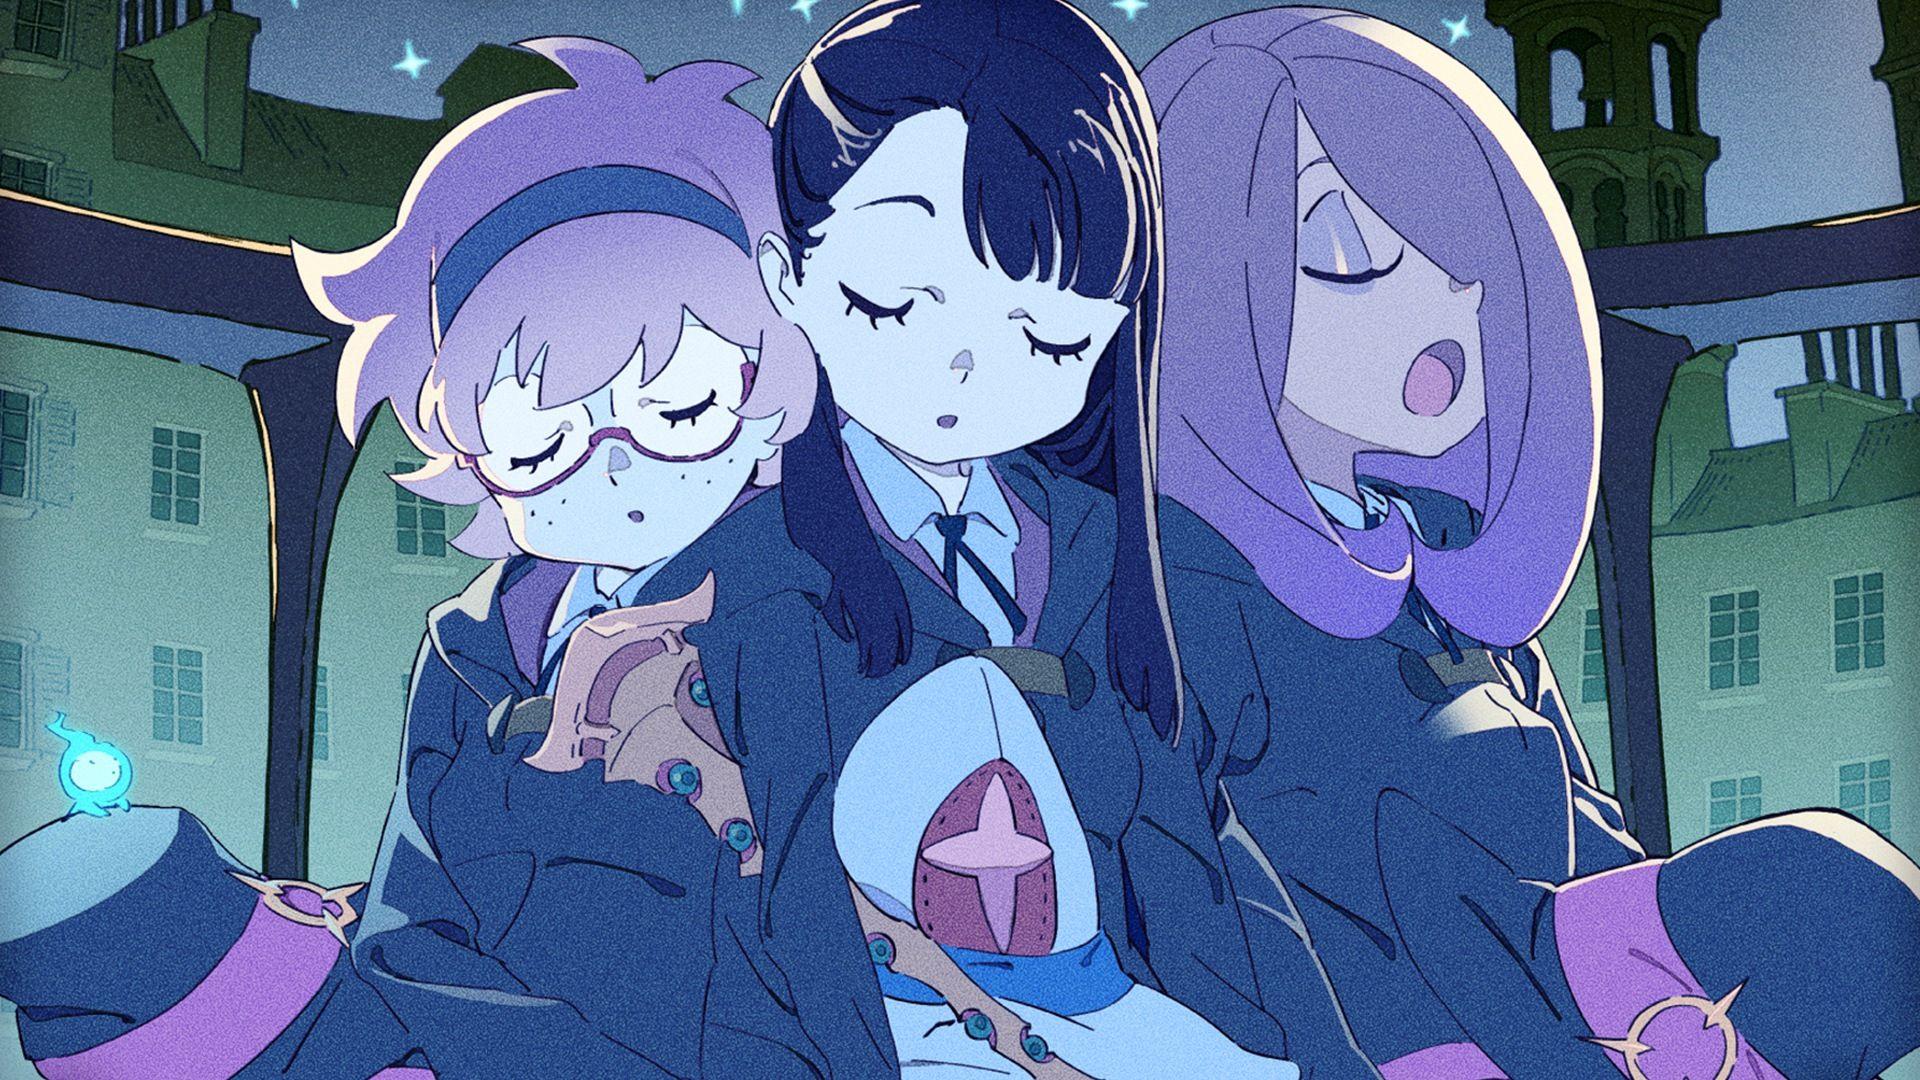 Lotte, Akko, and Sucy. Little Witch Academia